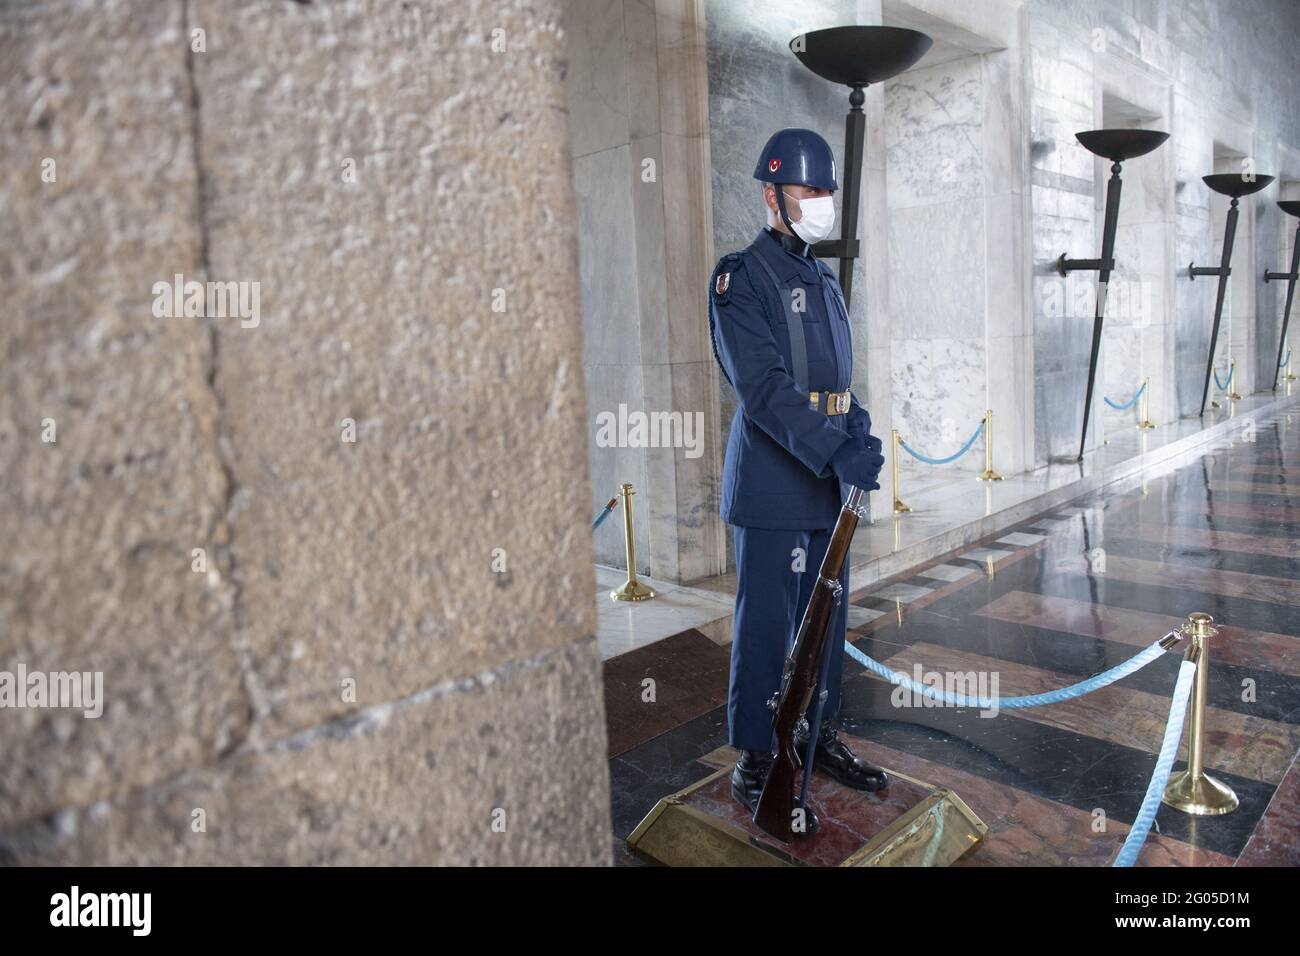 A Turkish soldier wears face mask as a preventive measure against the spread of the COVID-19 novel coronavirus, at Anitkabir, the mausoleum of Mustafa Kemal Ataturk, the founder of the Turkish Republic, in Ankara Turkey, on May 31, 2021. Turkey has confirmed 47,527 deaths and 5,249,404 positive cases of the coronavirus infection in the country. Turkey started easing its strict coronavirus lockdown on Monday by allowing movement during the day while keeping overnight and weekend curfews in place, the Interior Ministry said in a directive on Sunday. Photo by Abdurrahman Antakyali/Depo Photos/ABA Stock Photo